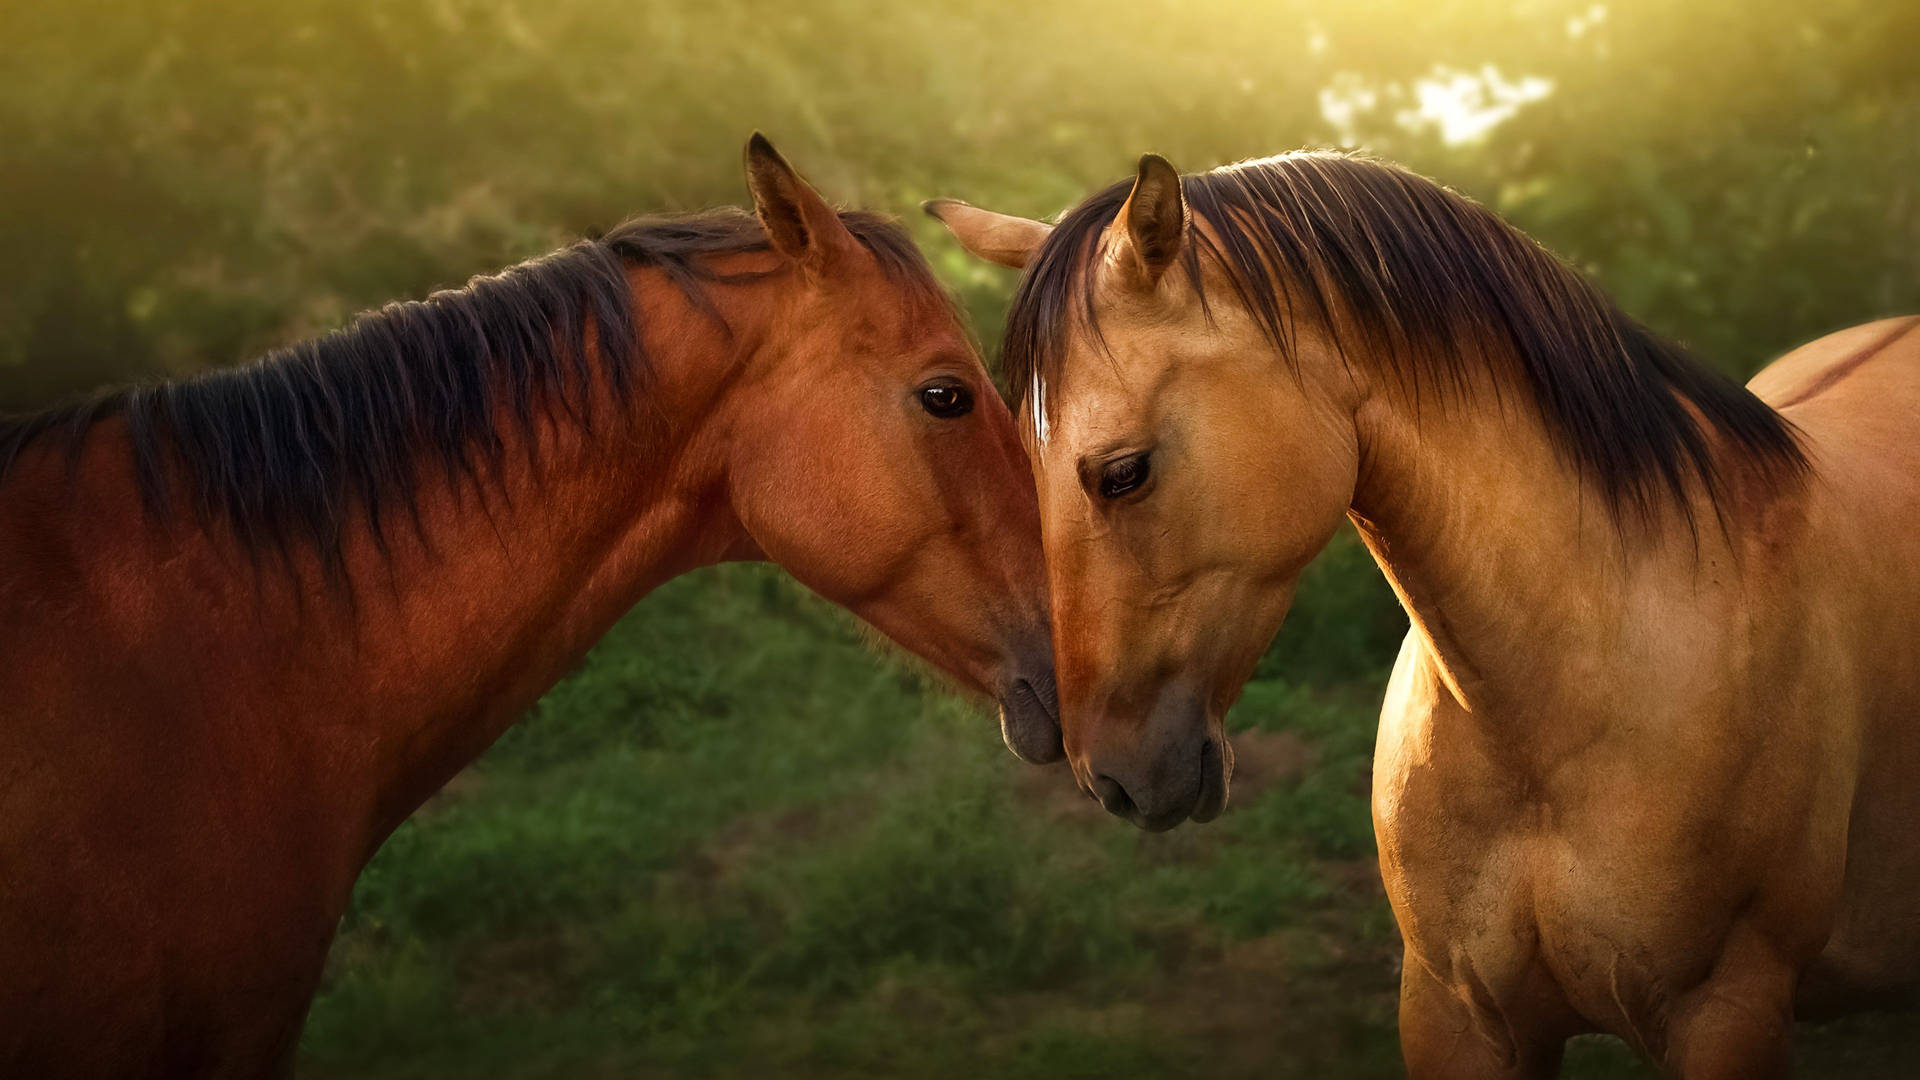 Beautiful Horses With Heads Together